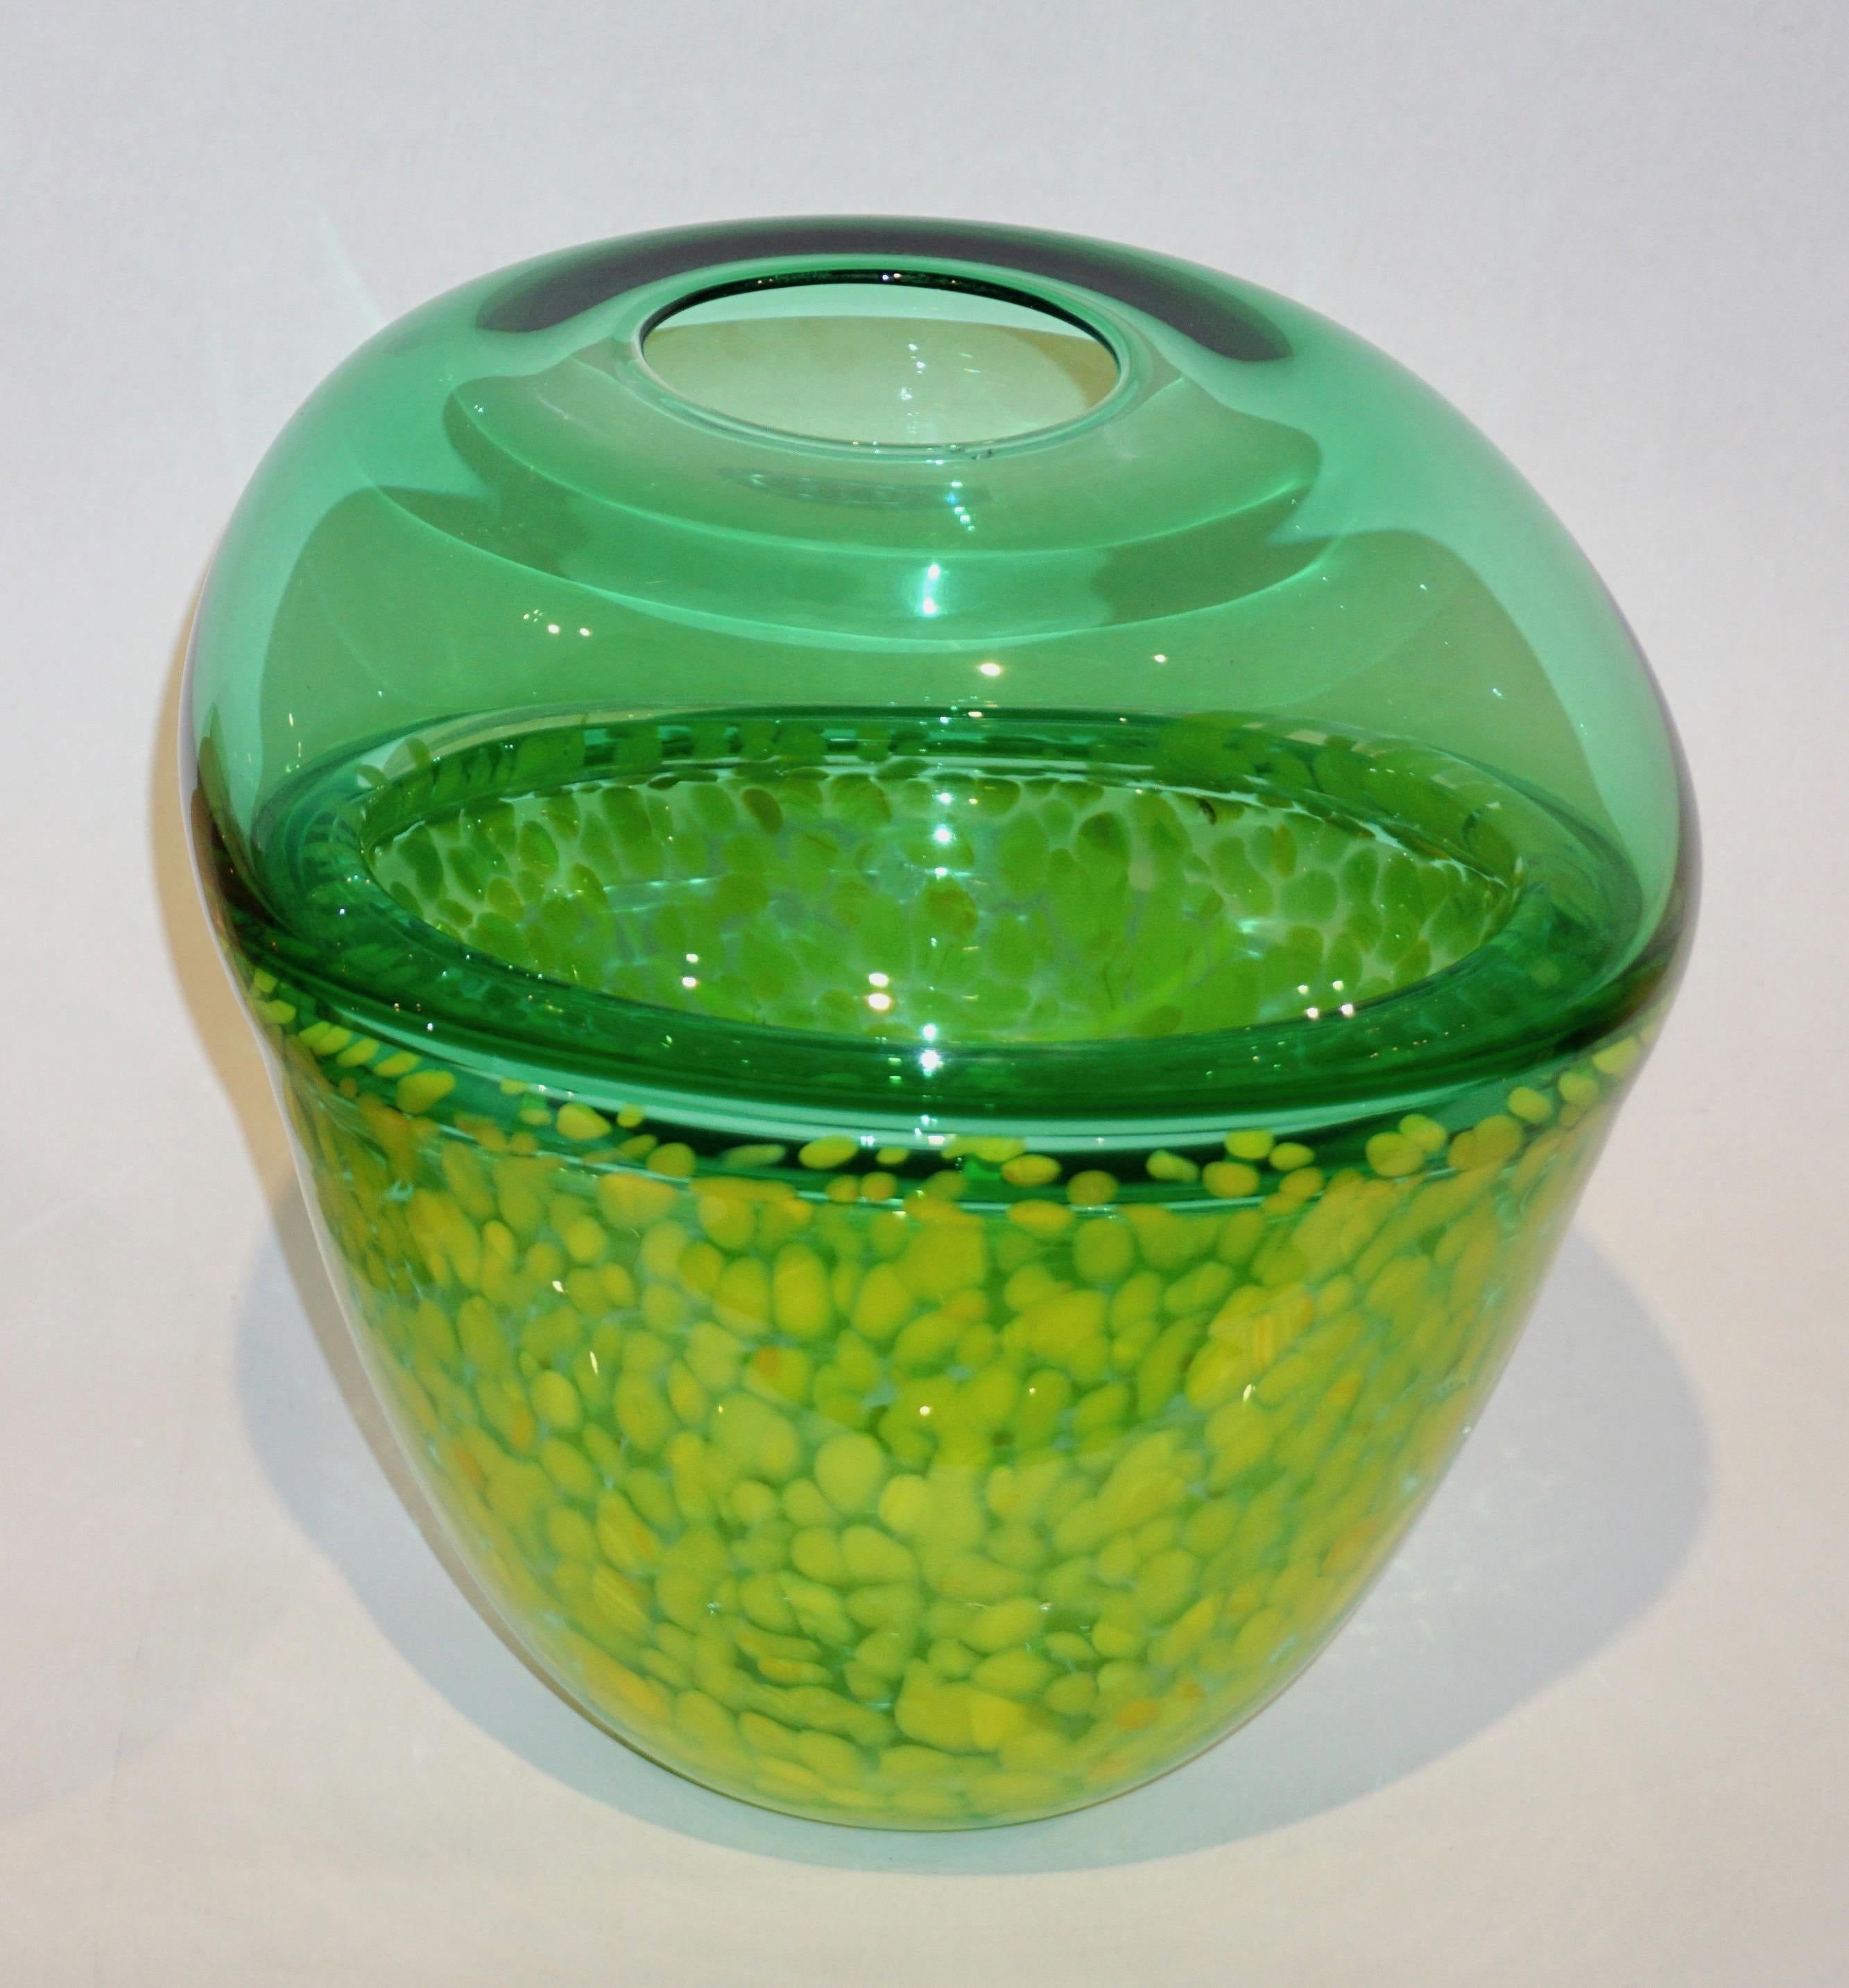 Hilton McConnico by Formia 1990s Italian Green Spotted Murano Art Glass Vase 6